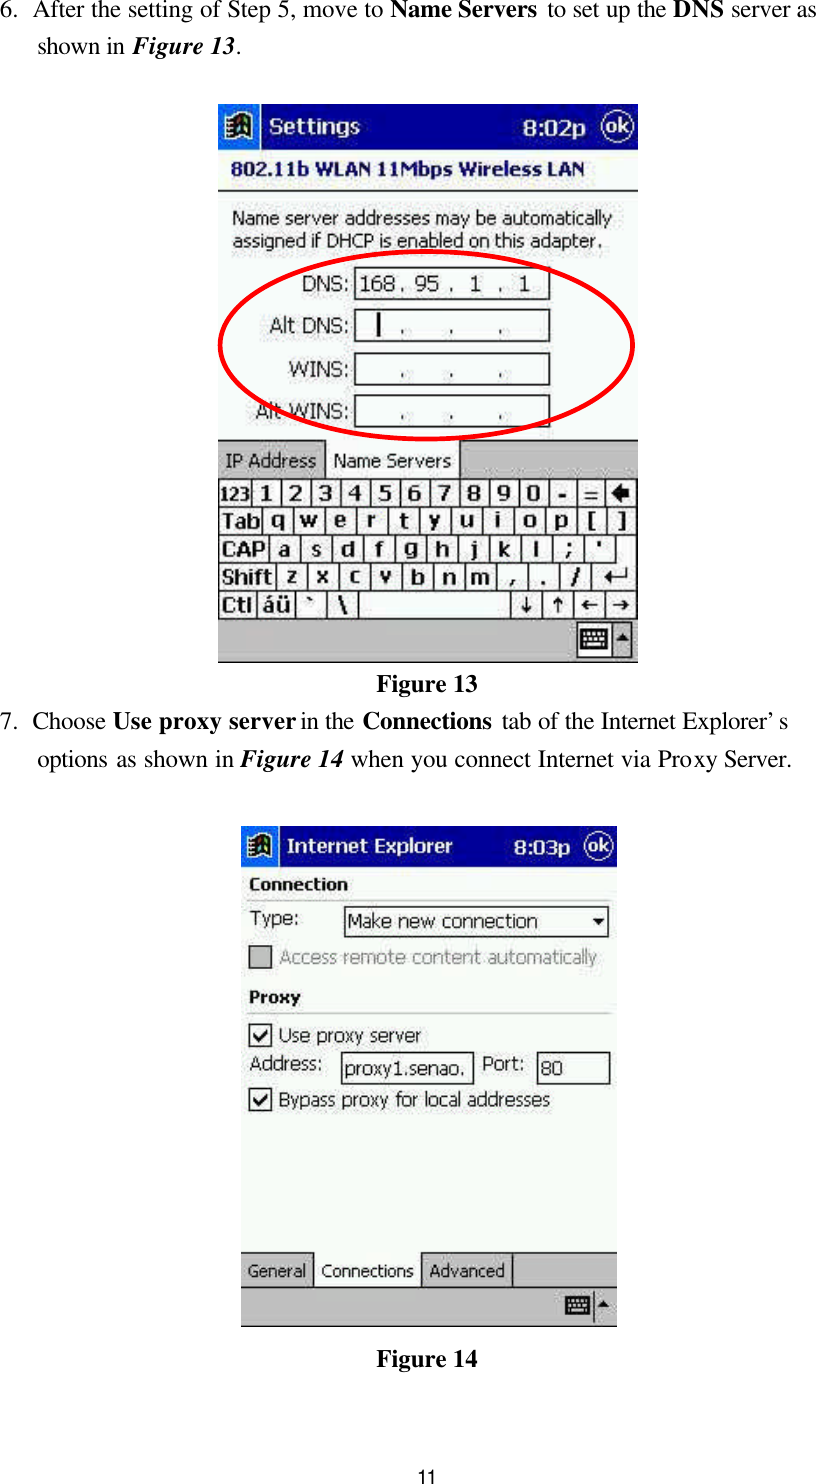  11 6. After the setting of Step 5, move to Name Servers to set up the DNS server as shown in Figure 13.   Figure 13 7. Choose Use proxy server in the Connections tab of the Internet Explorer’s options as shown in Figure 14 when you connect Internet via Proxy Server.   Figure 14  